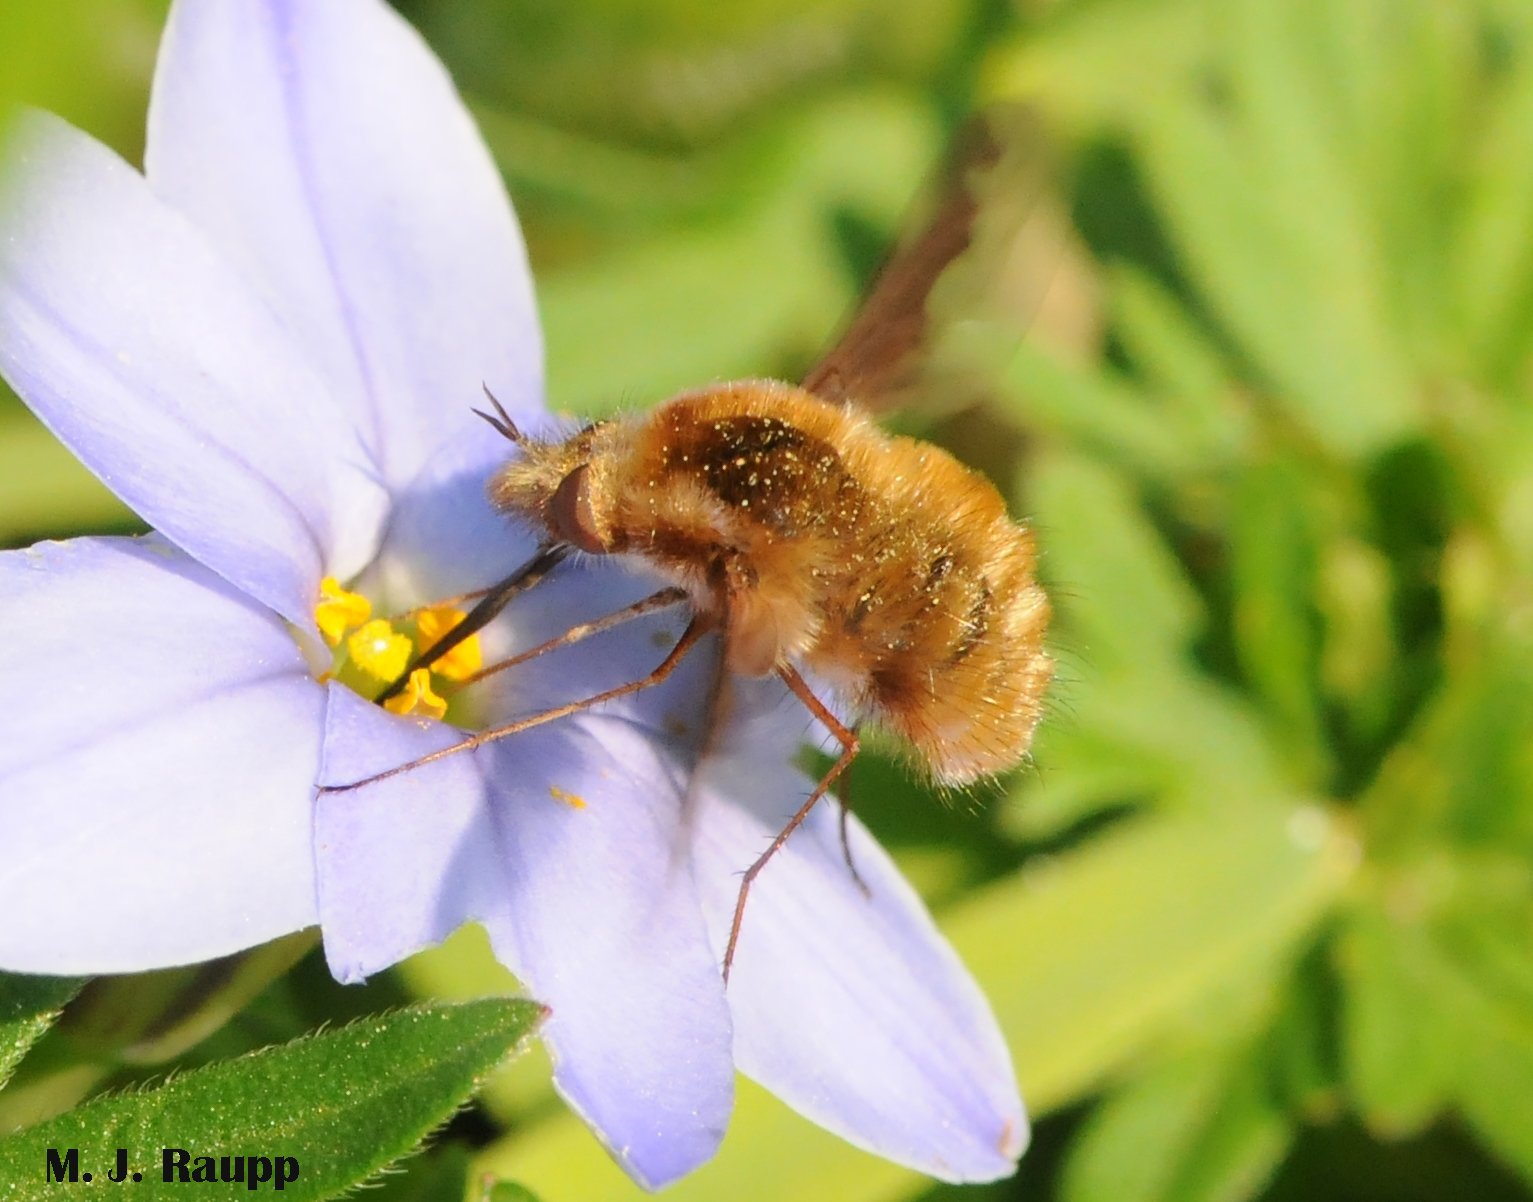 Danger afoot for ground nesting bees: Look out for bee flies, Bombyliidae